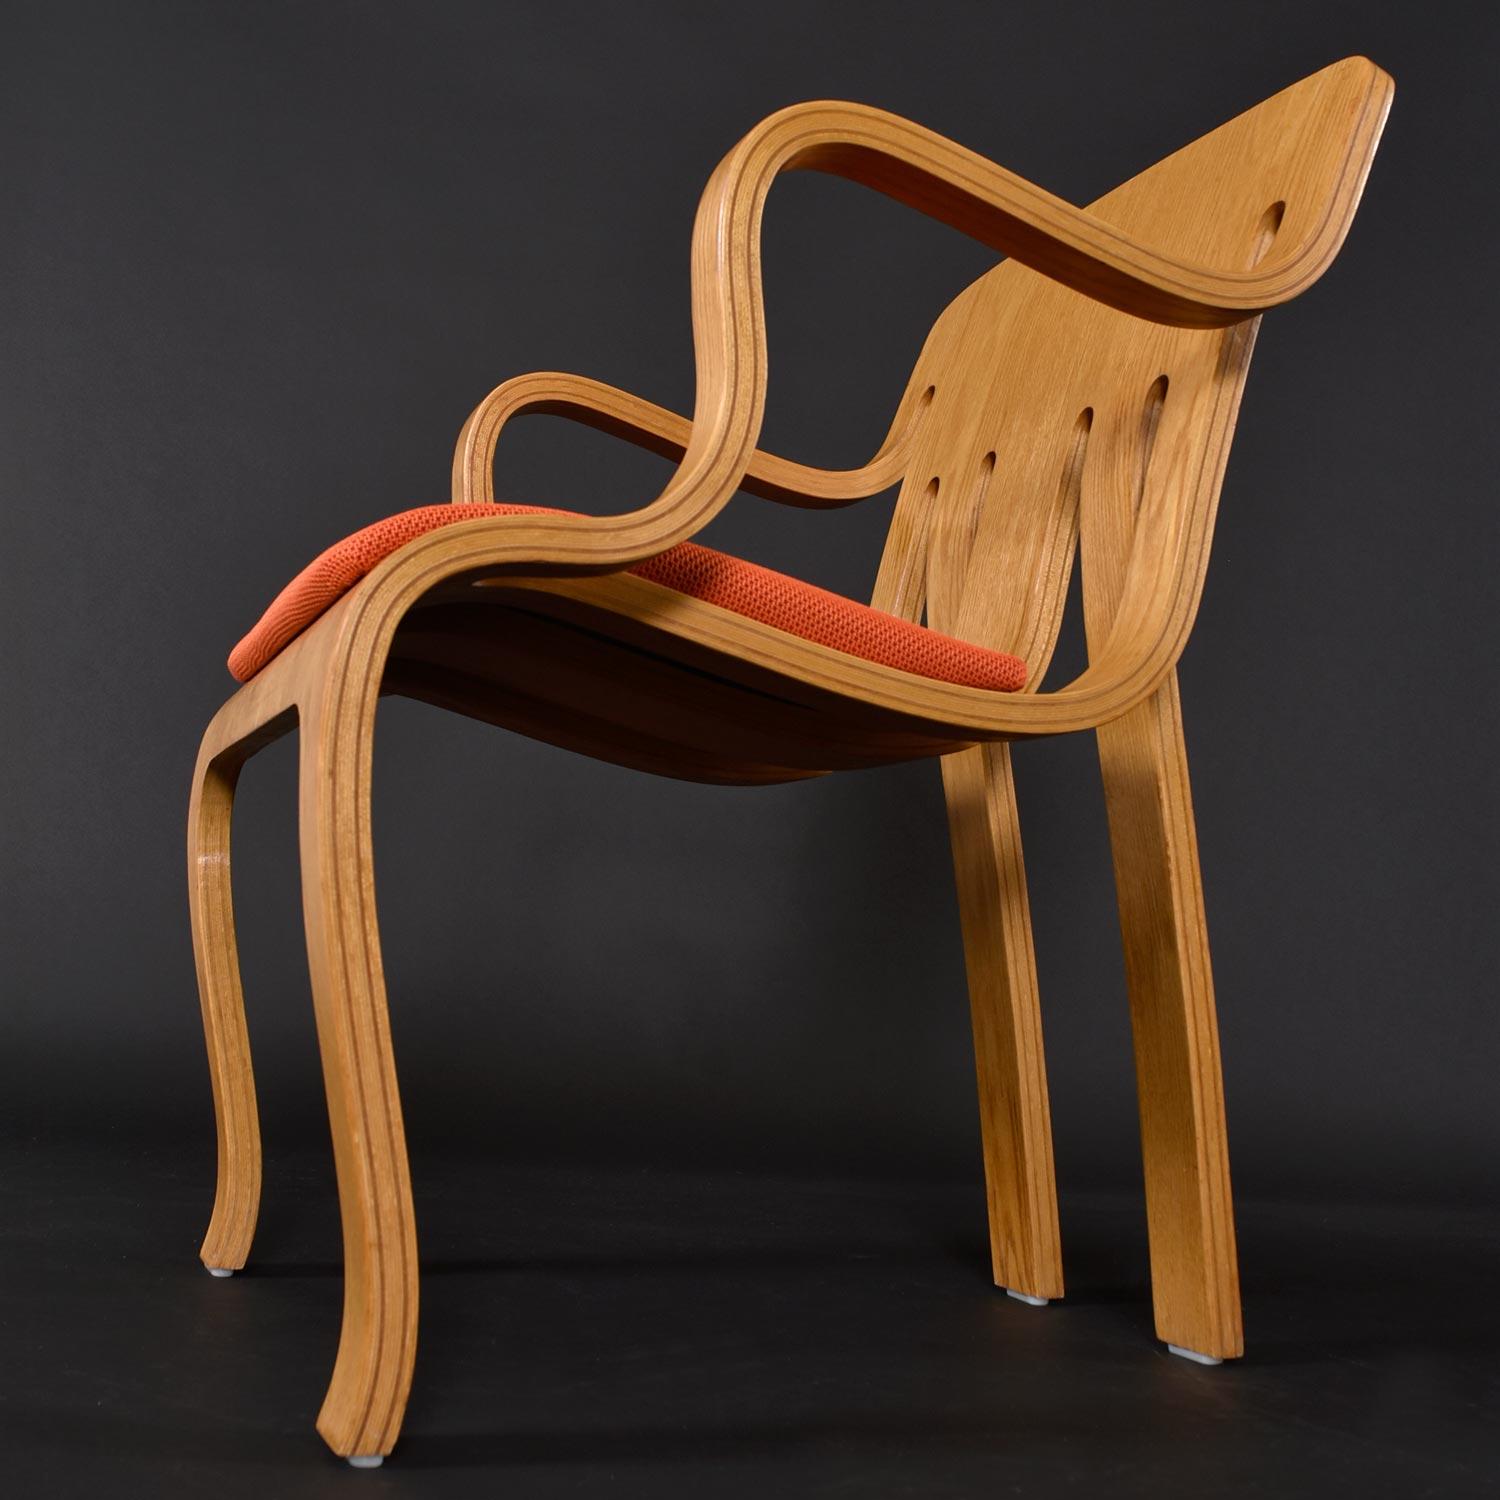 1978 Molded Plywood Armchair Set of 2 in Oak by Peter Danko for Thonet In Good Condition For Sale In Chattanooga, TN